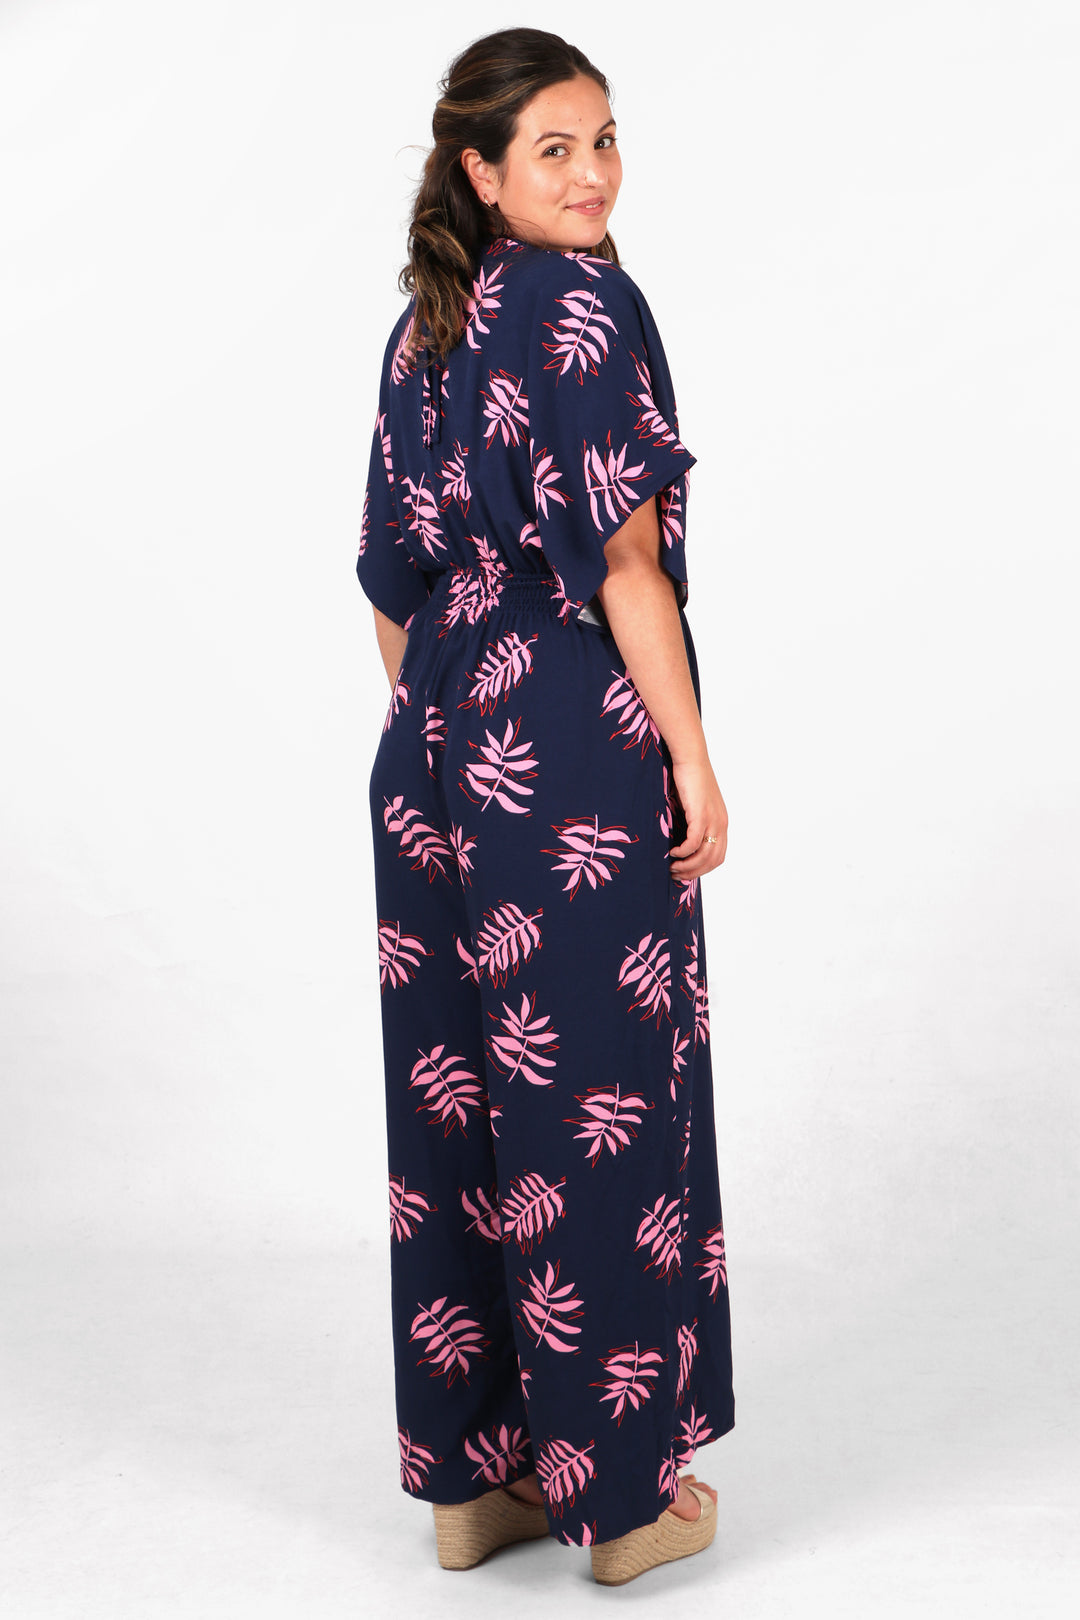 model showing the back of the jumpsuit and the all over palm leaf pattern